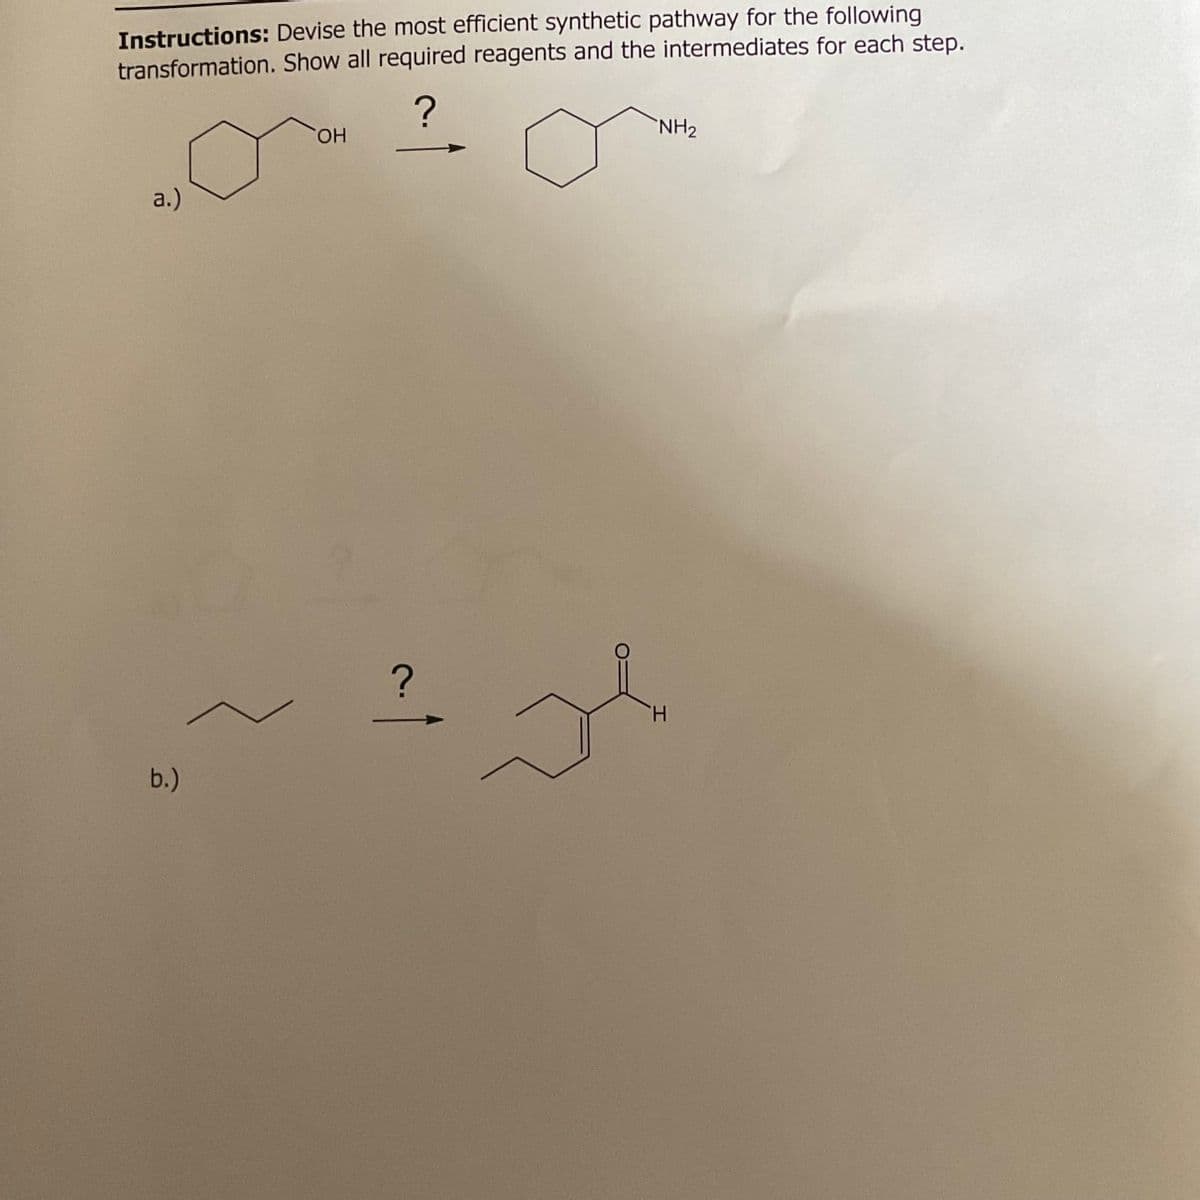 Instructions: Devise the most efficient synthetic pathway for the following
transformation. Show all required reagents and the intermediates for each step.
a.)
b.)
?
OH
?
H
NH2